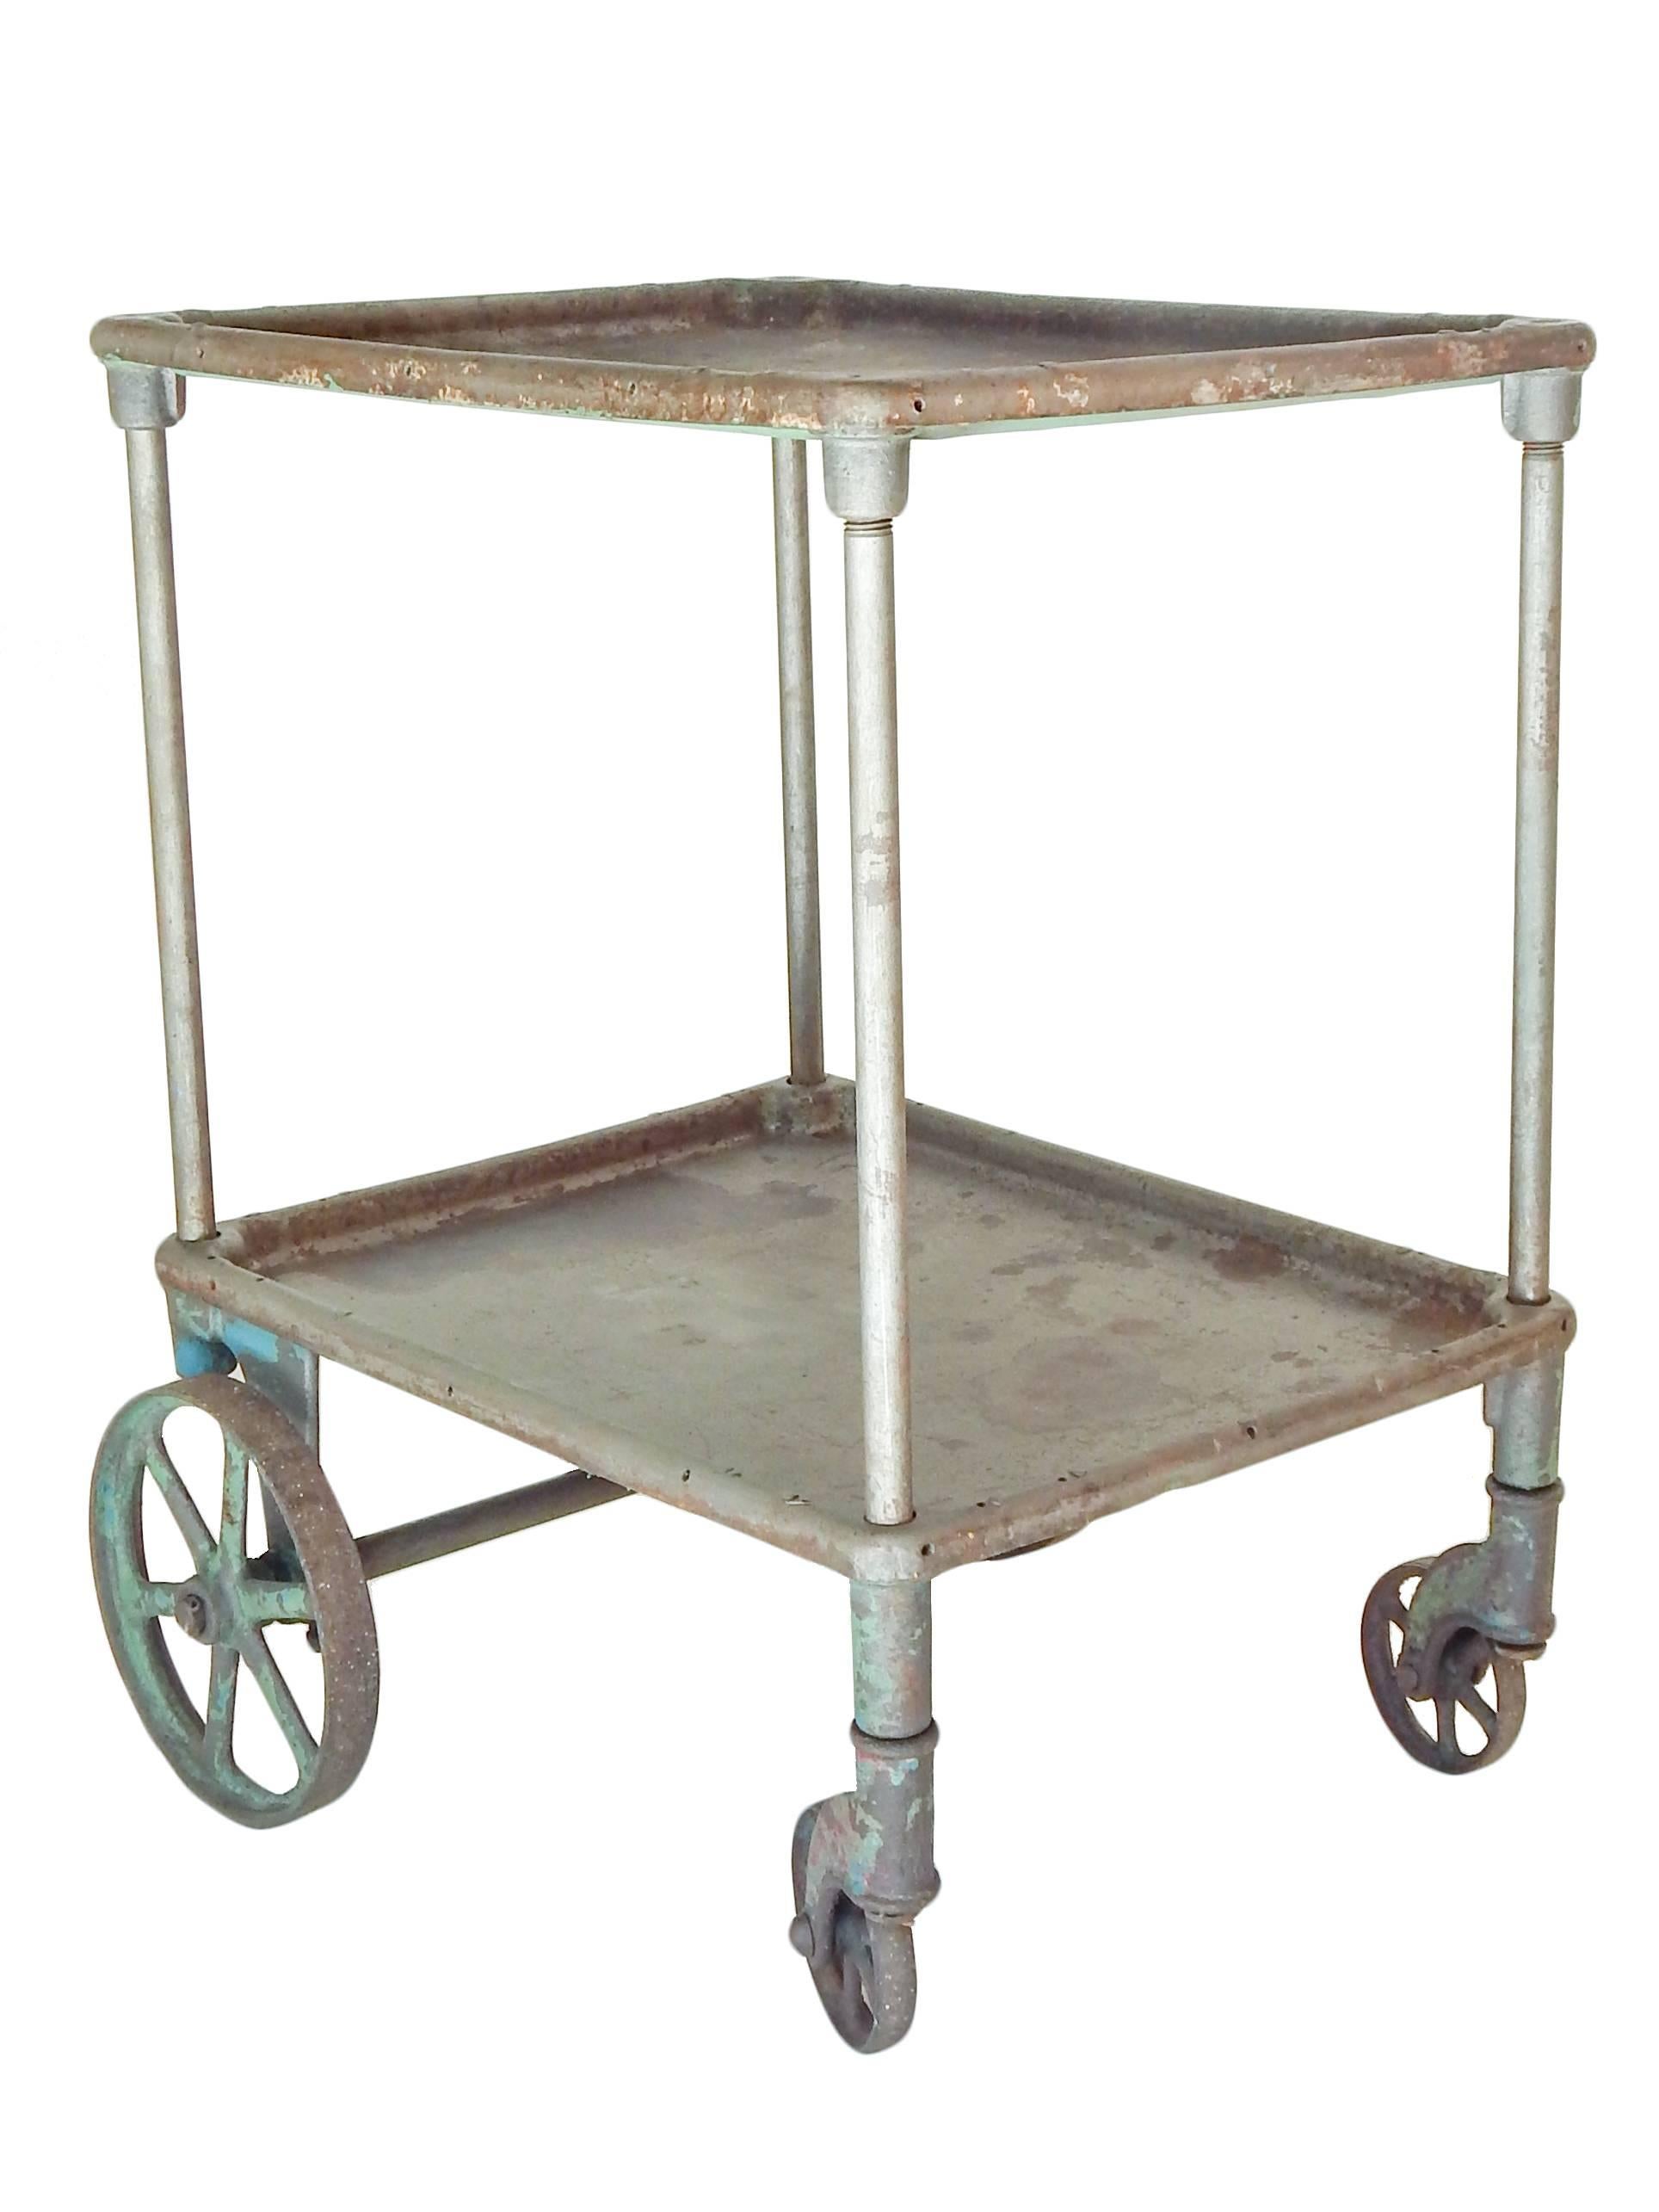 Industrial cart with remnants of old paint.